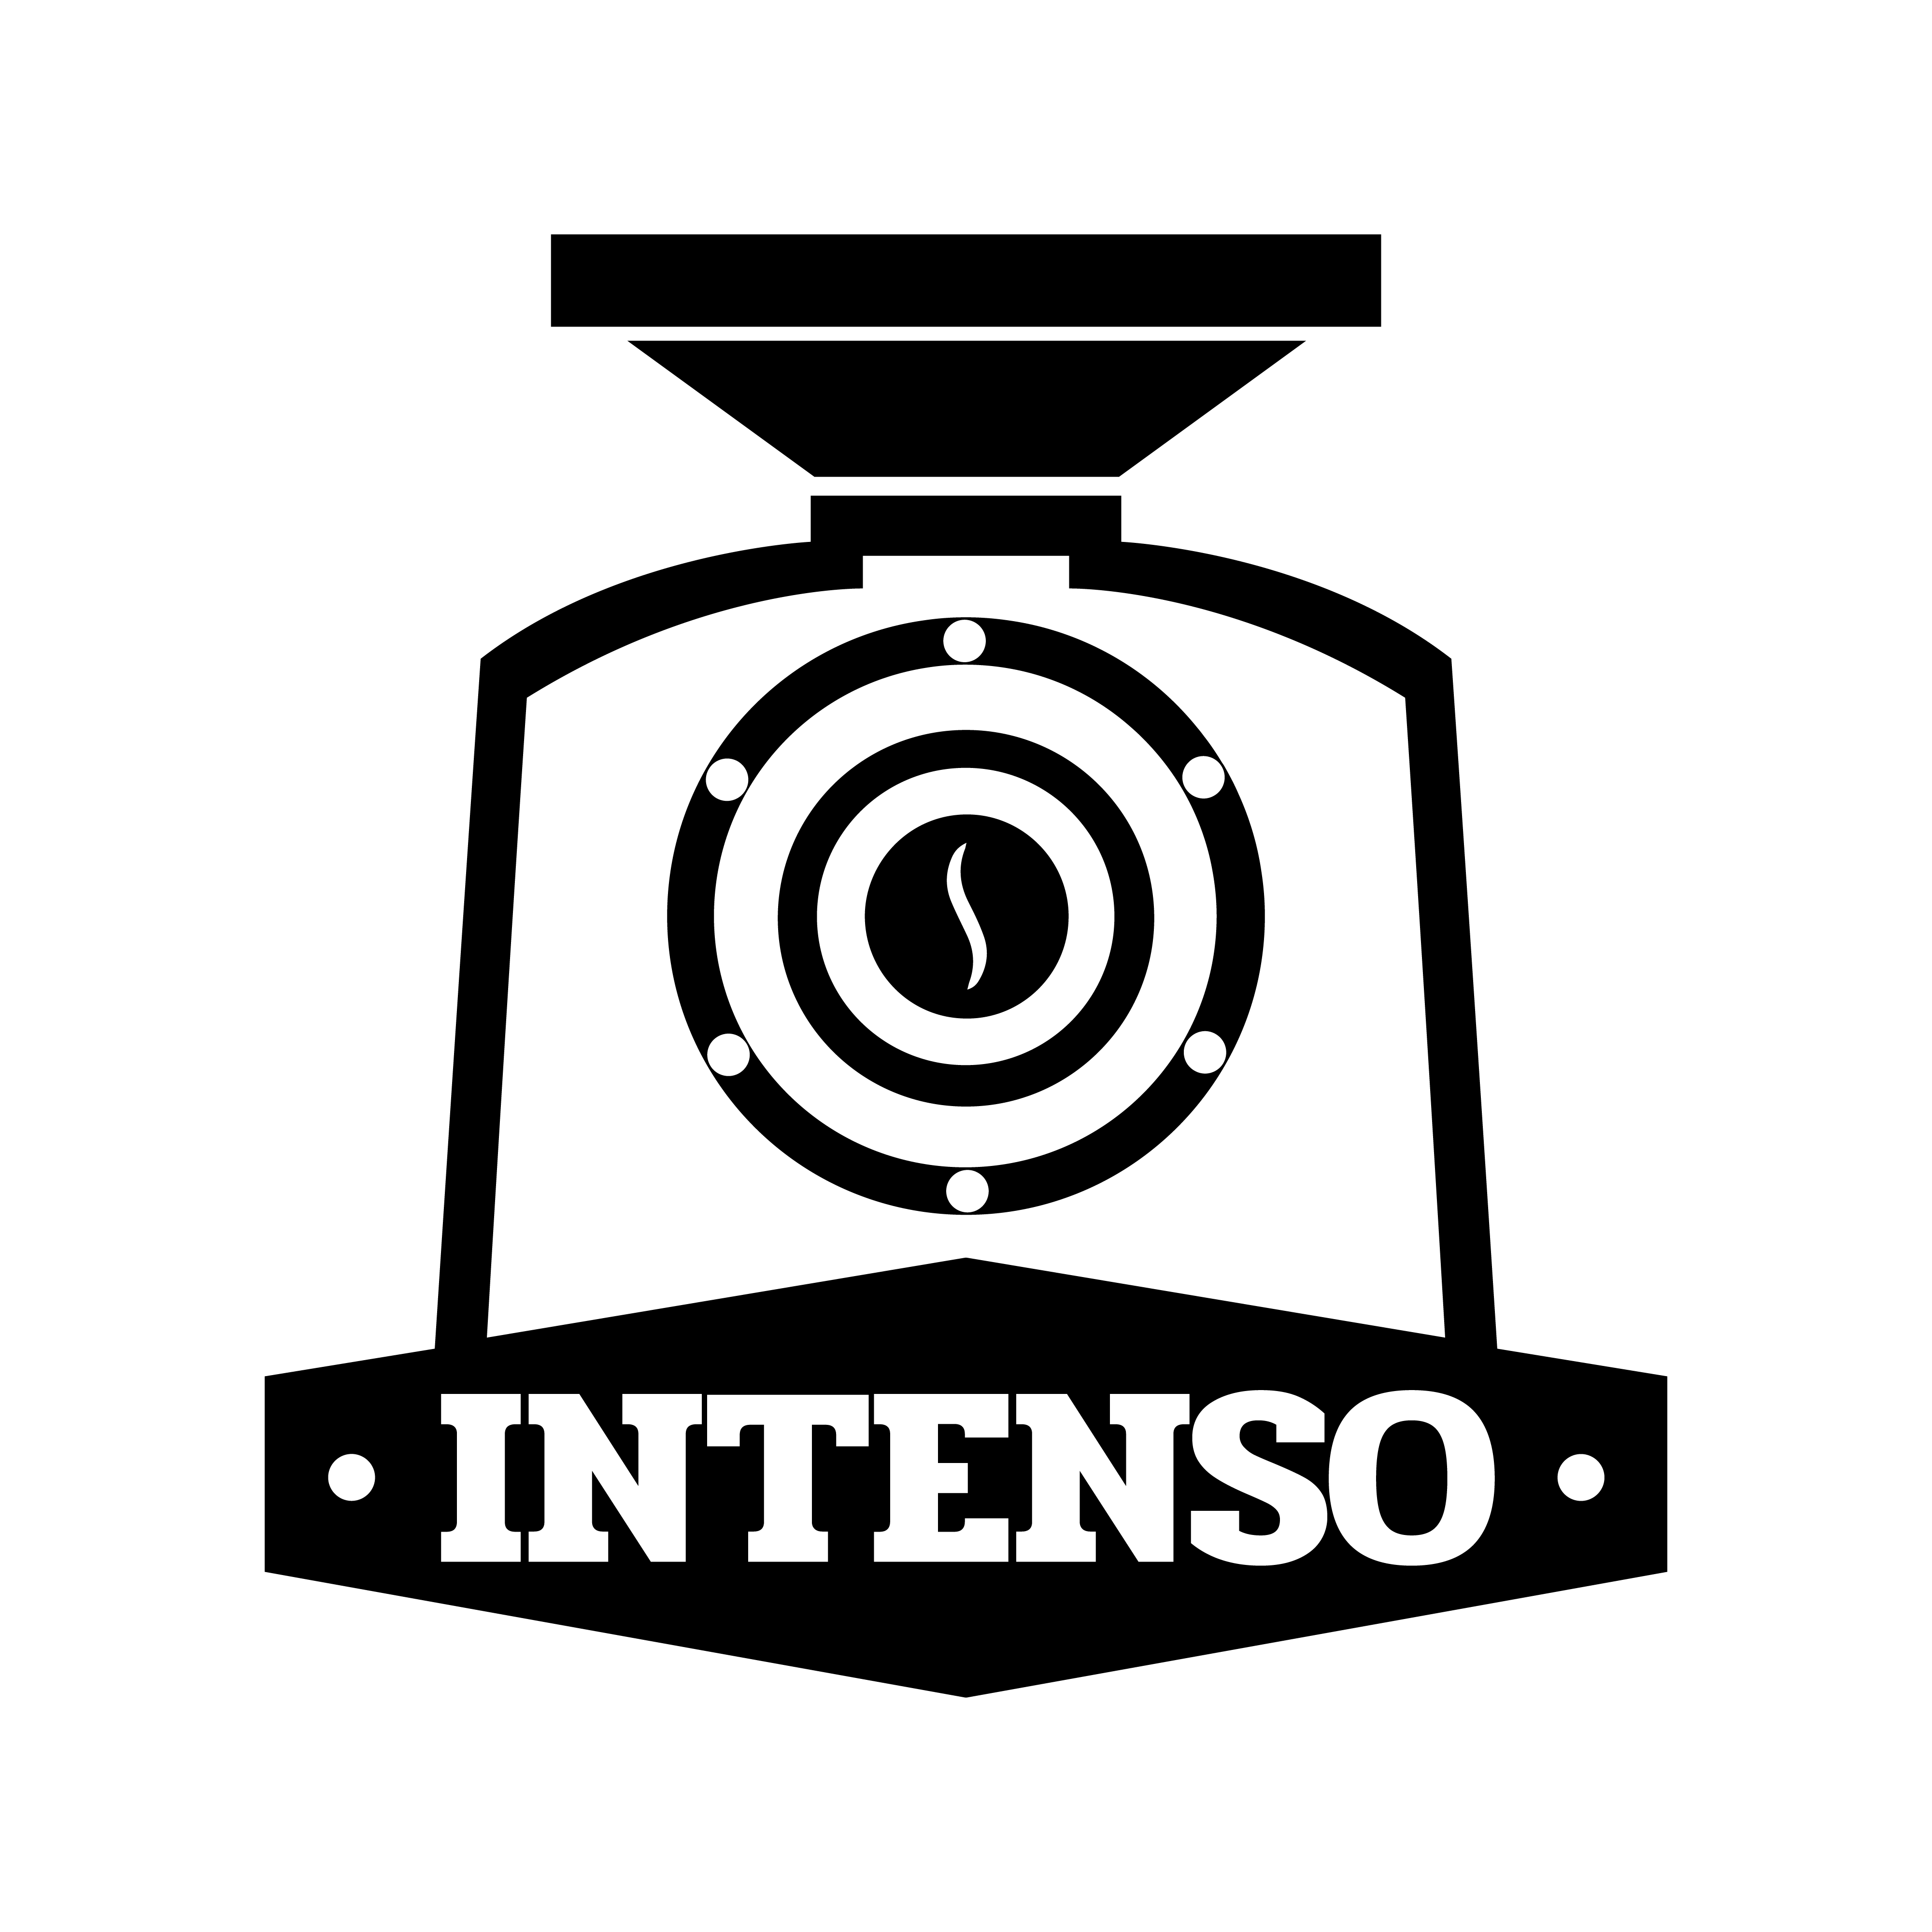 INTENSO COFFEE ROASTER – 2ND MILE SPECIALTY VIỆT NAMCO., LTD